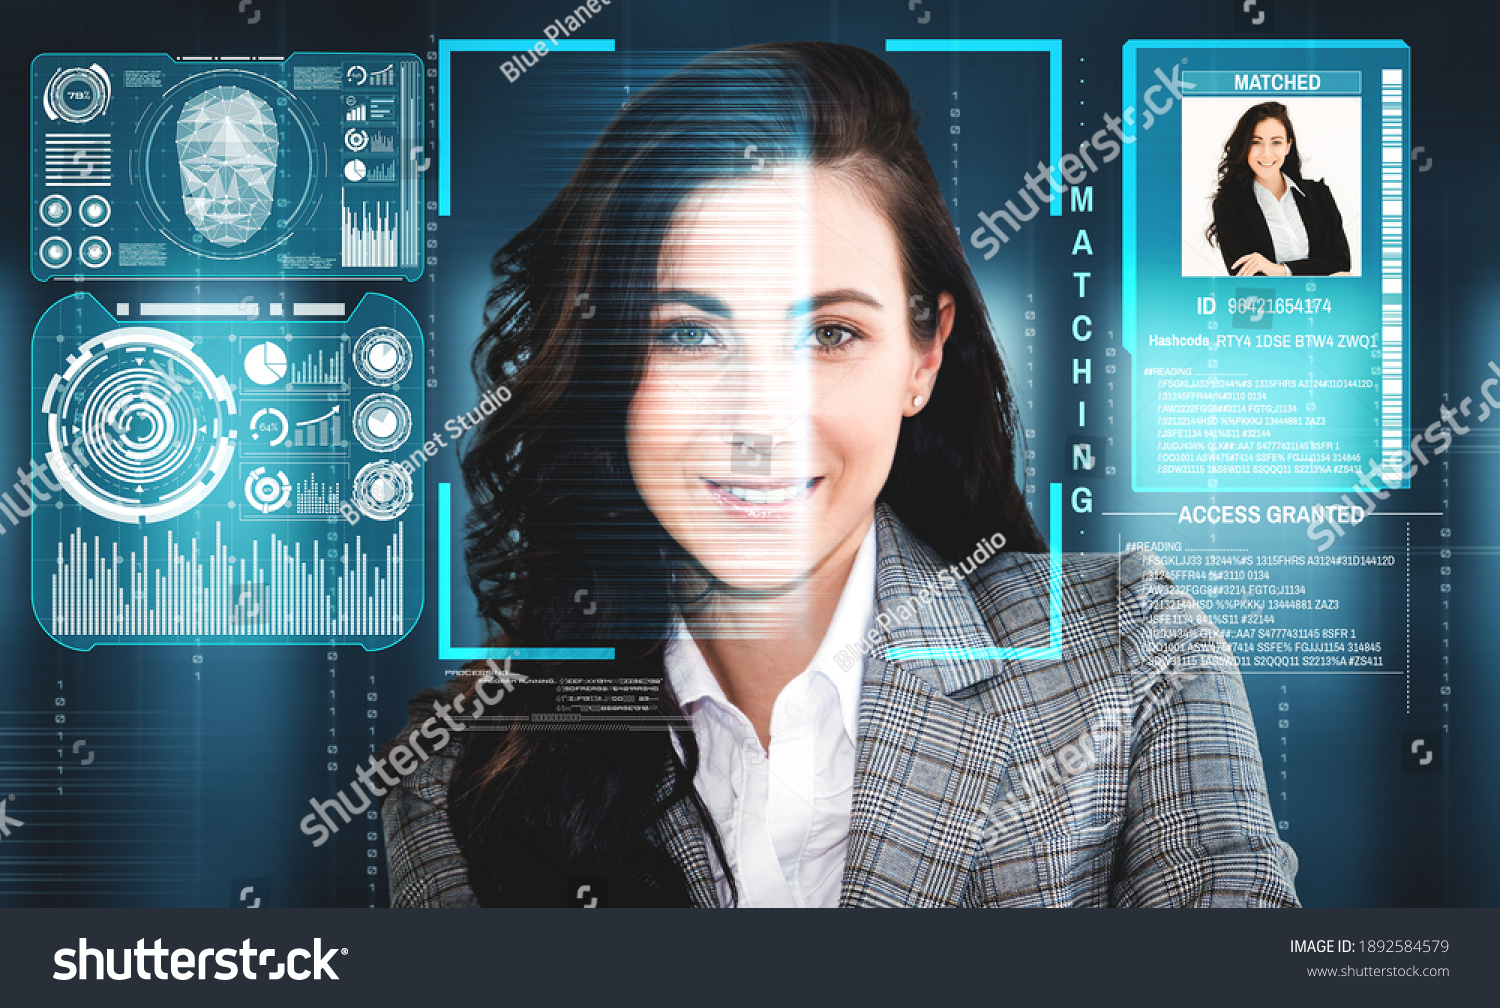 Facial recognition technology scan and detect people face for identification . Future concept interface showing digital biometric security system that analyze human face to verify personal data . #1892584579